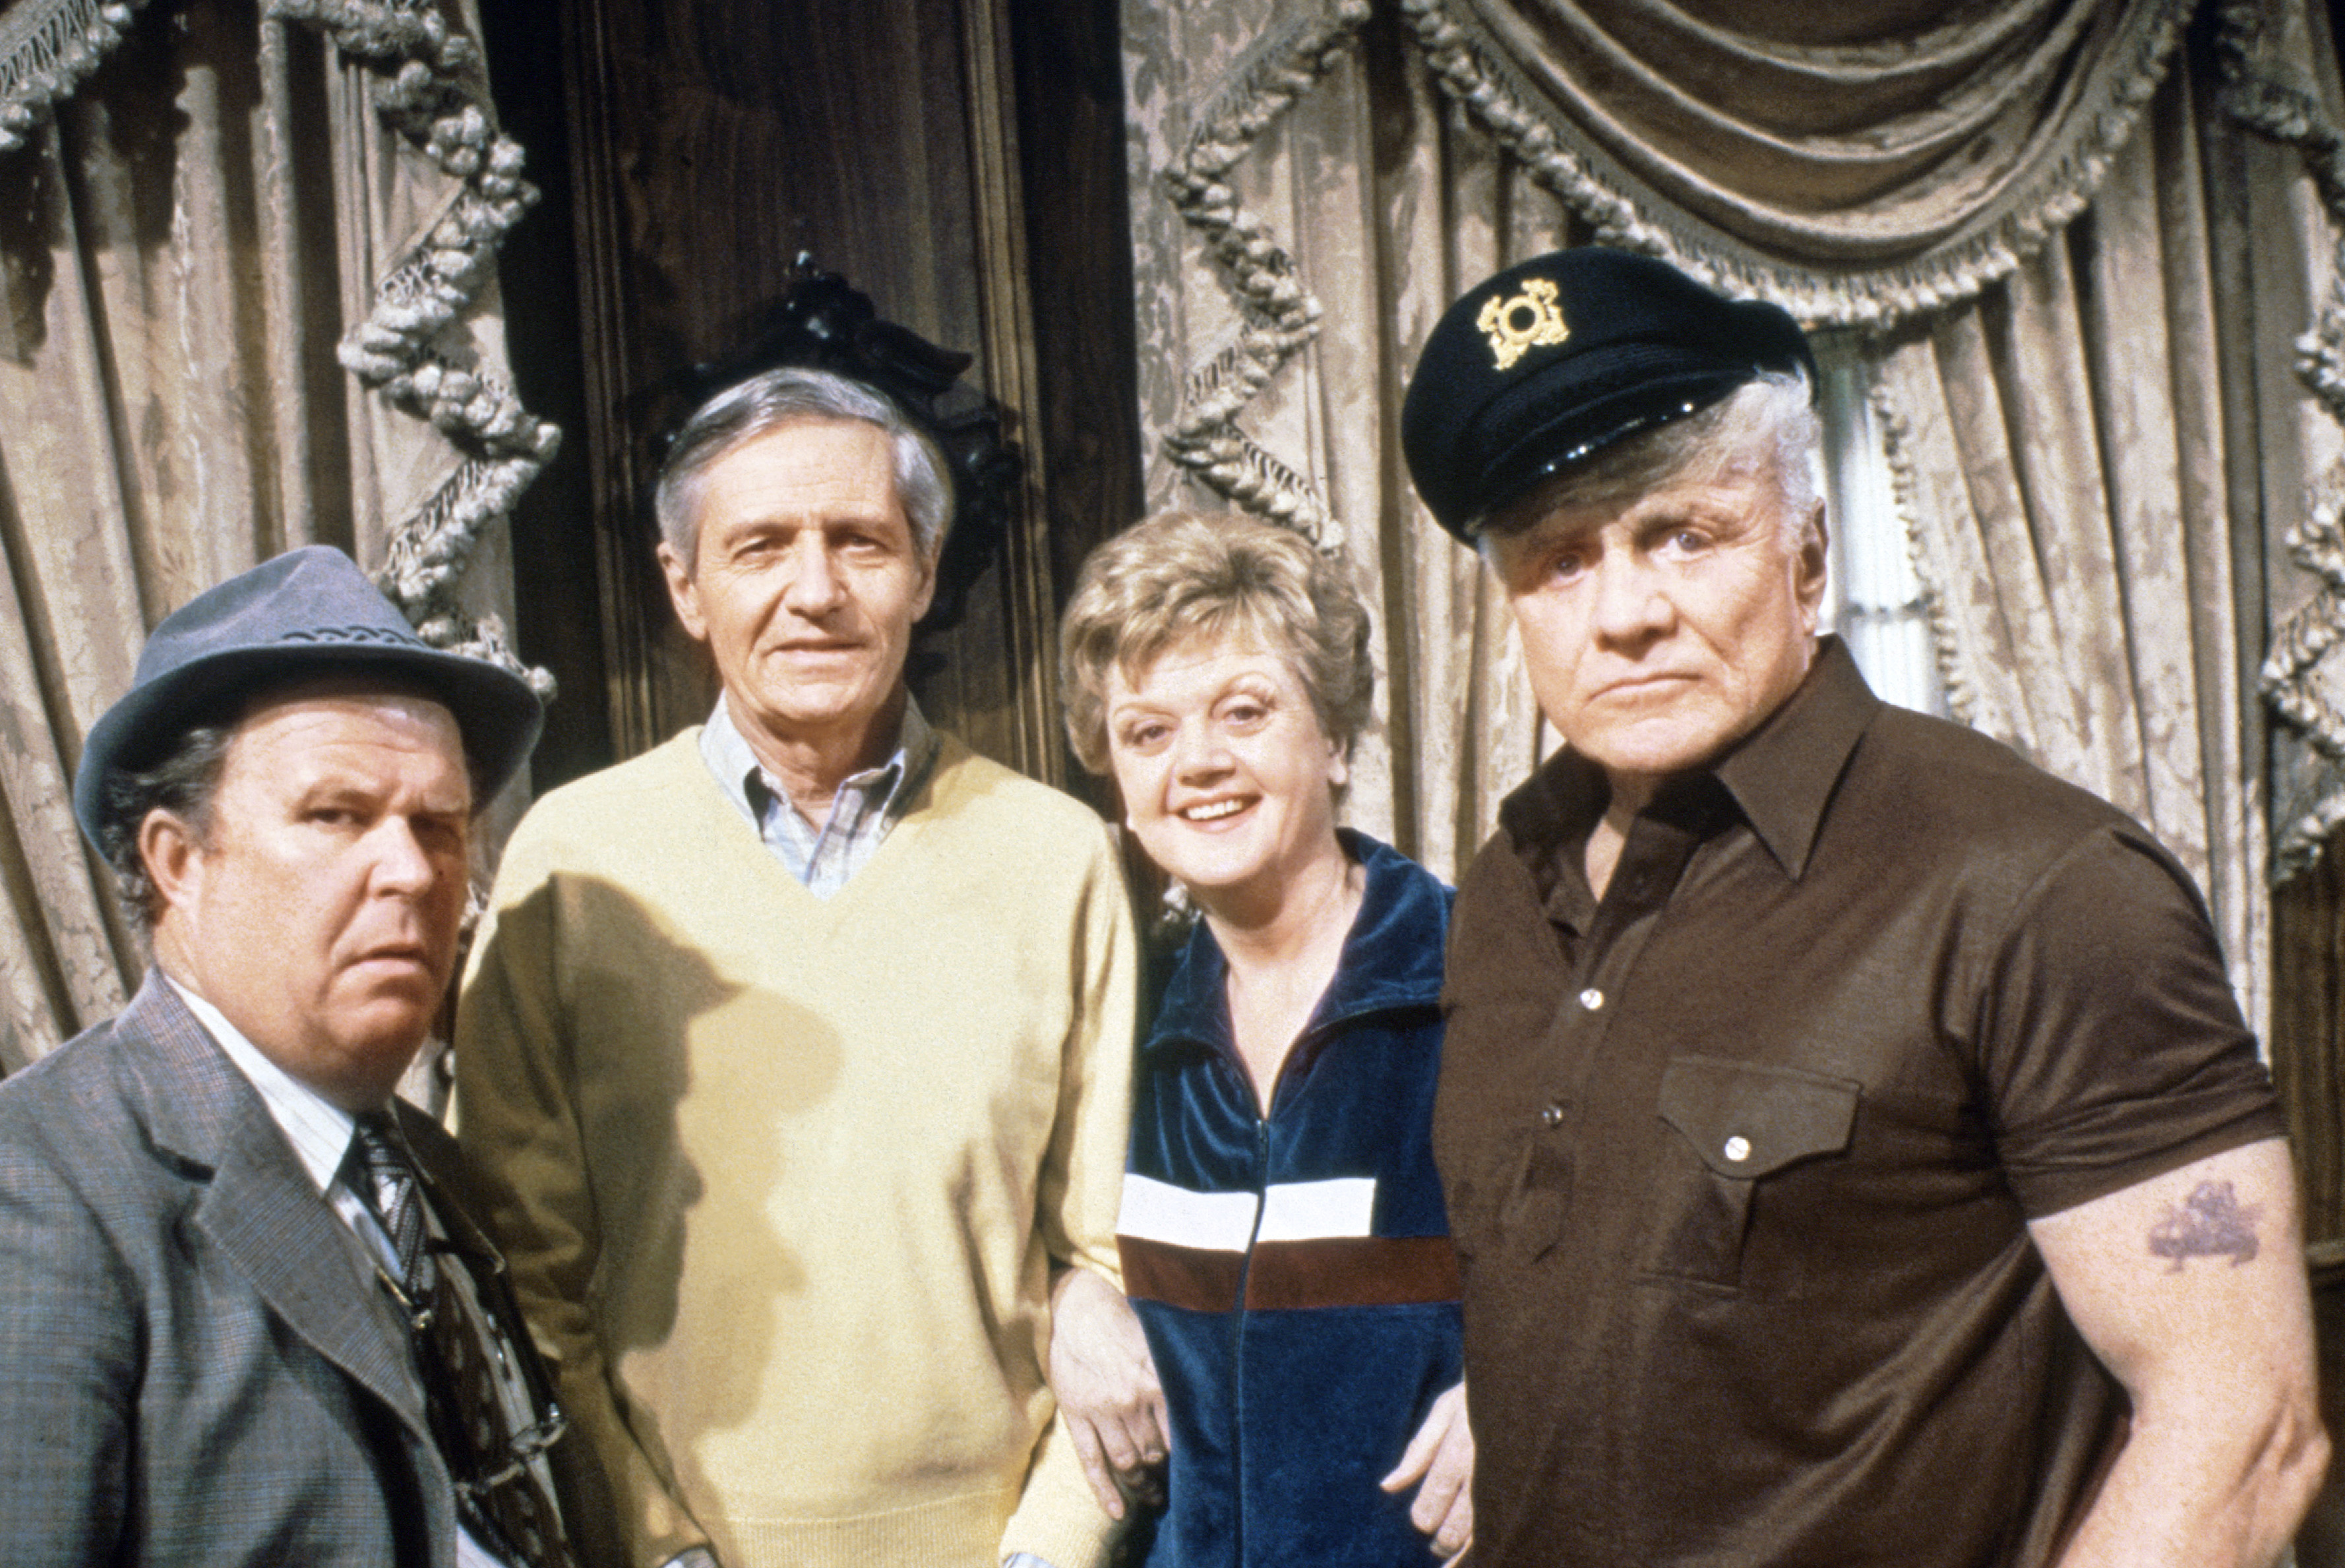 The cast of Murder, She Wrote.